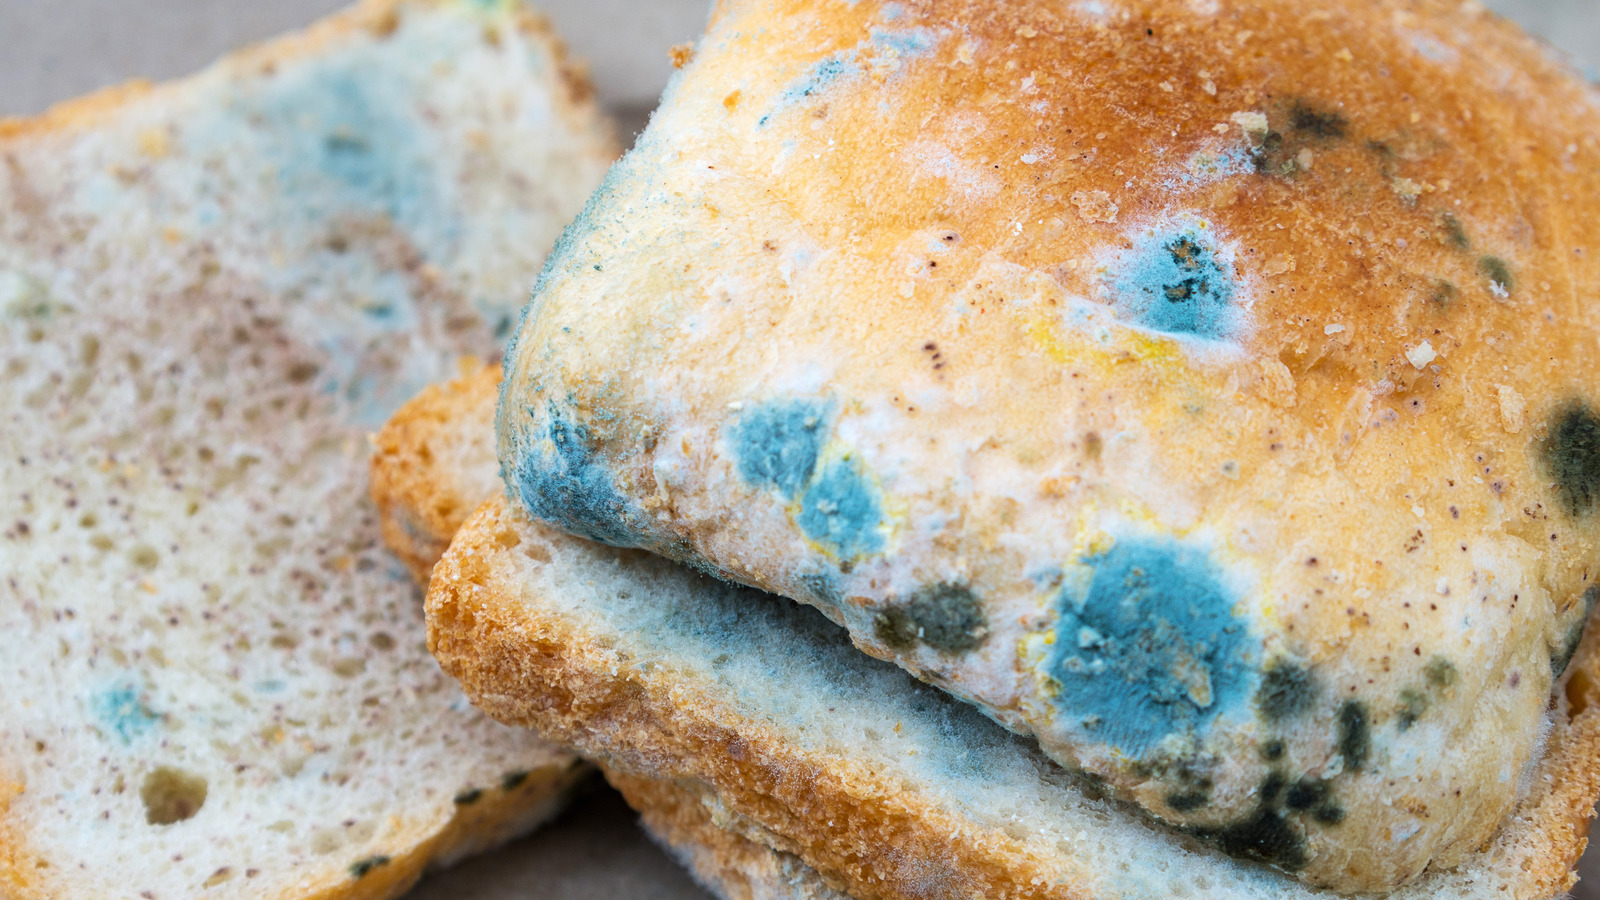 Moldy Food: What to do?